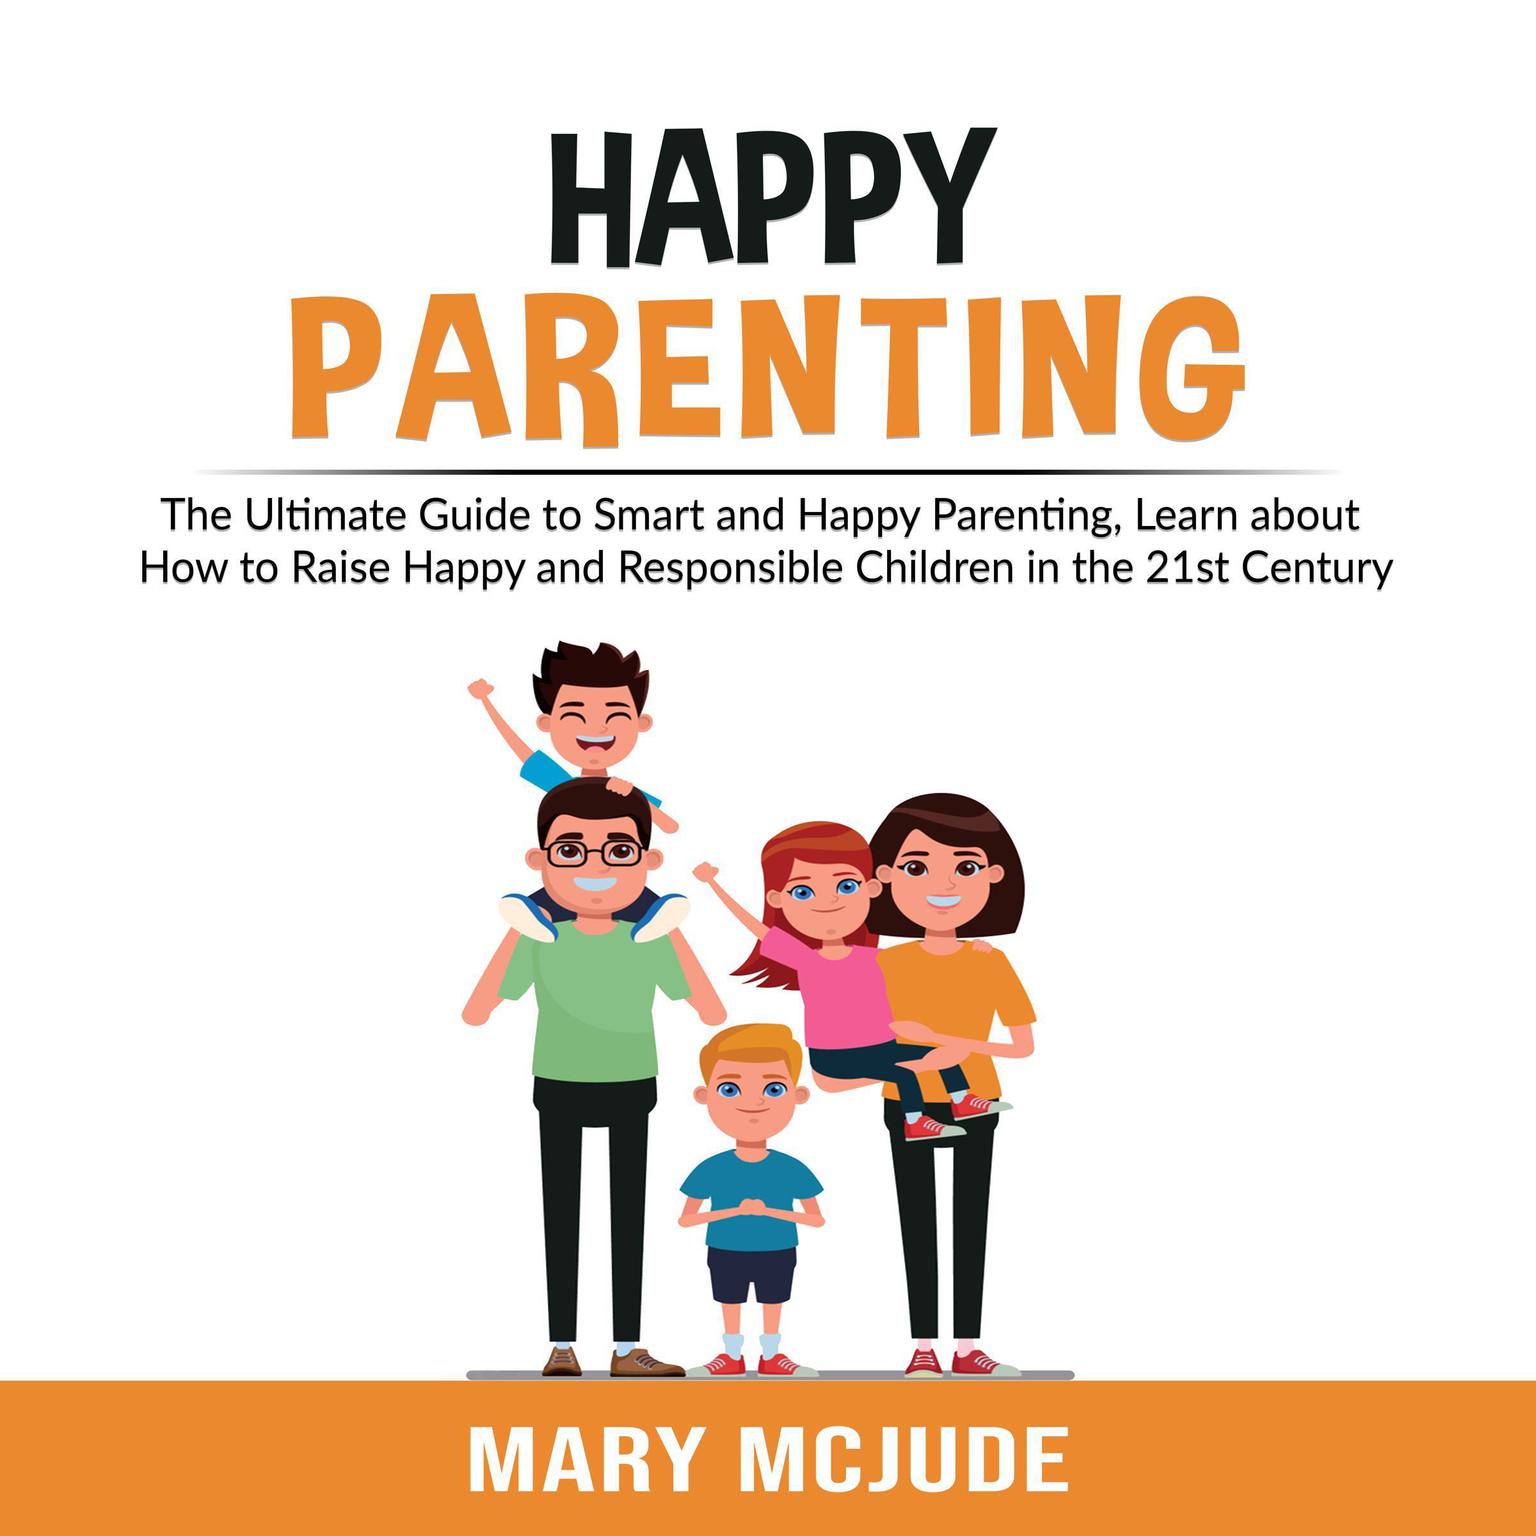 Happy Parenting: The Ultimate Guide to Smart and Happy Parenting, Learn about How to Raise Happy and Responsible Children in the 21st Century Audiobook, by Mary McJude